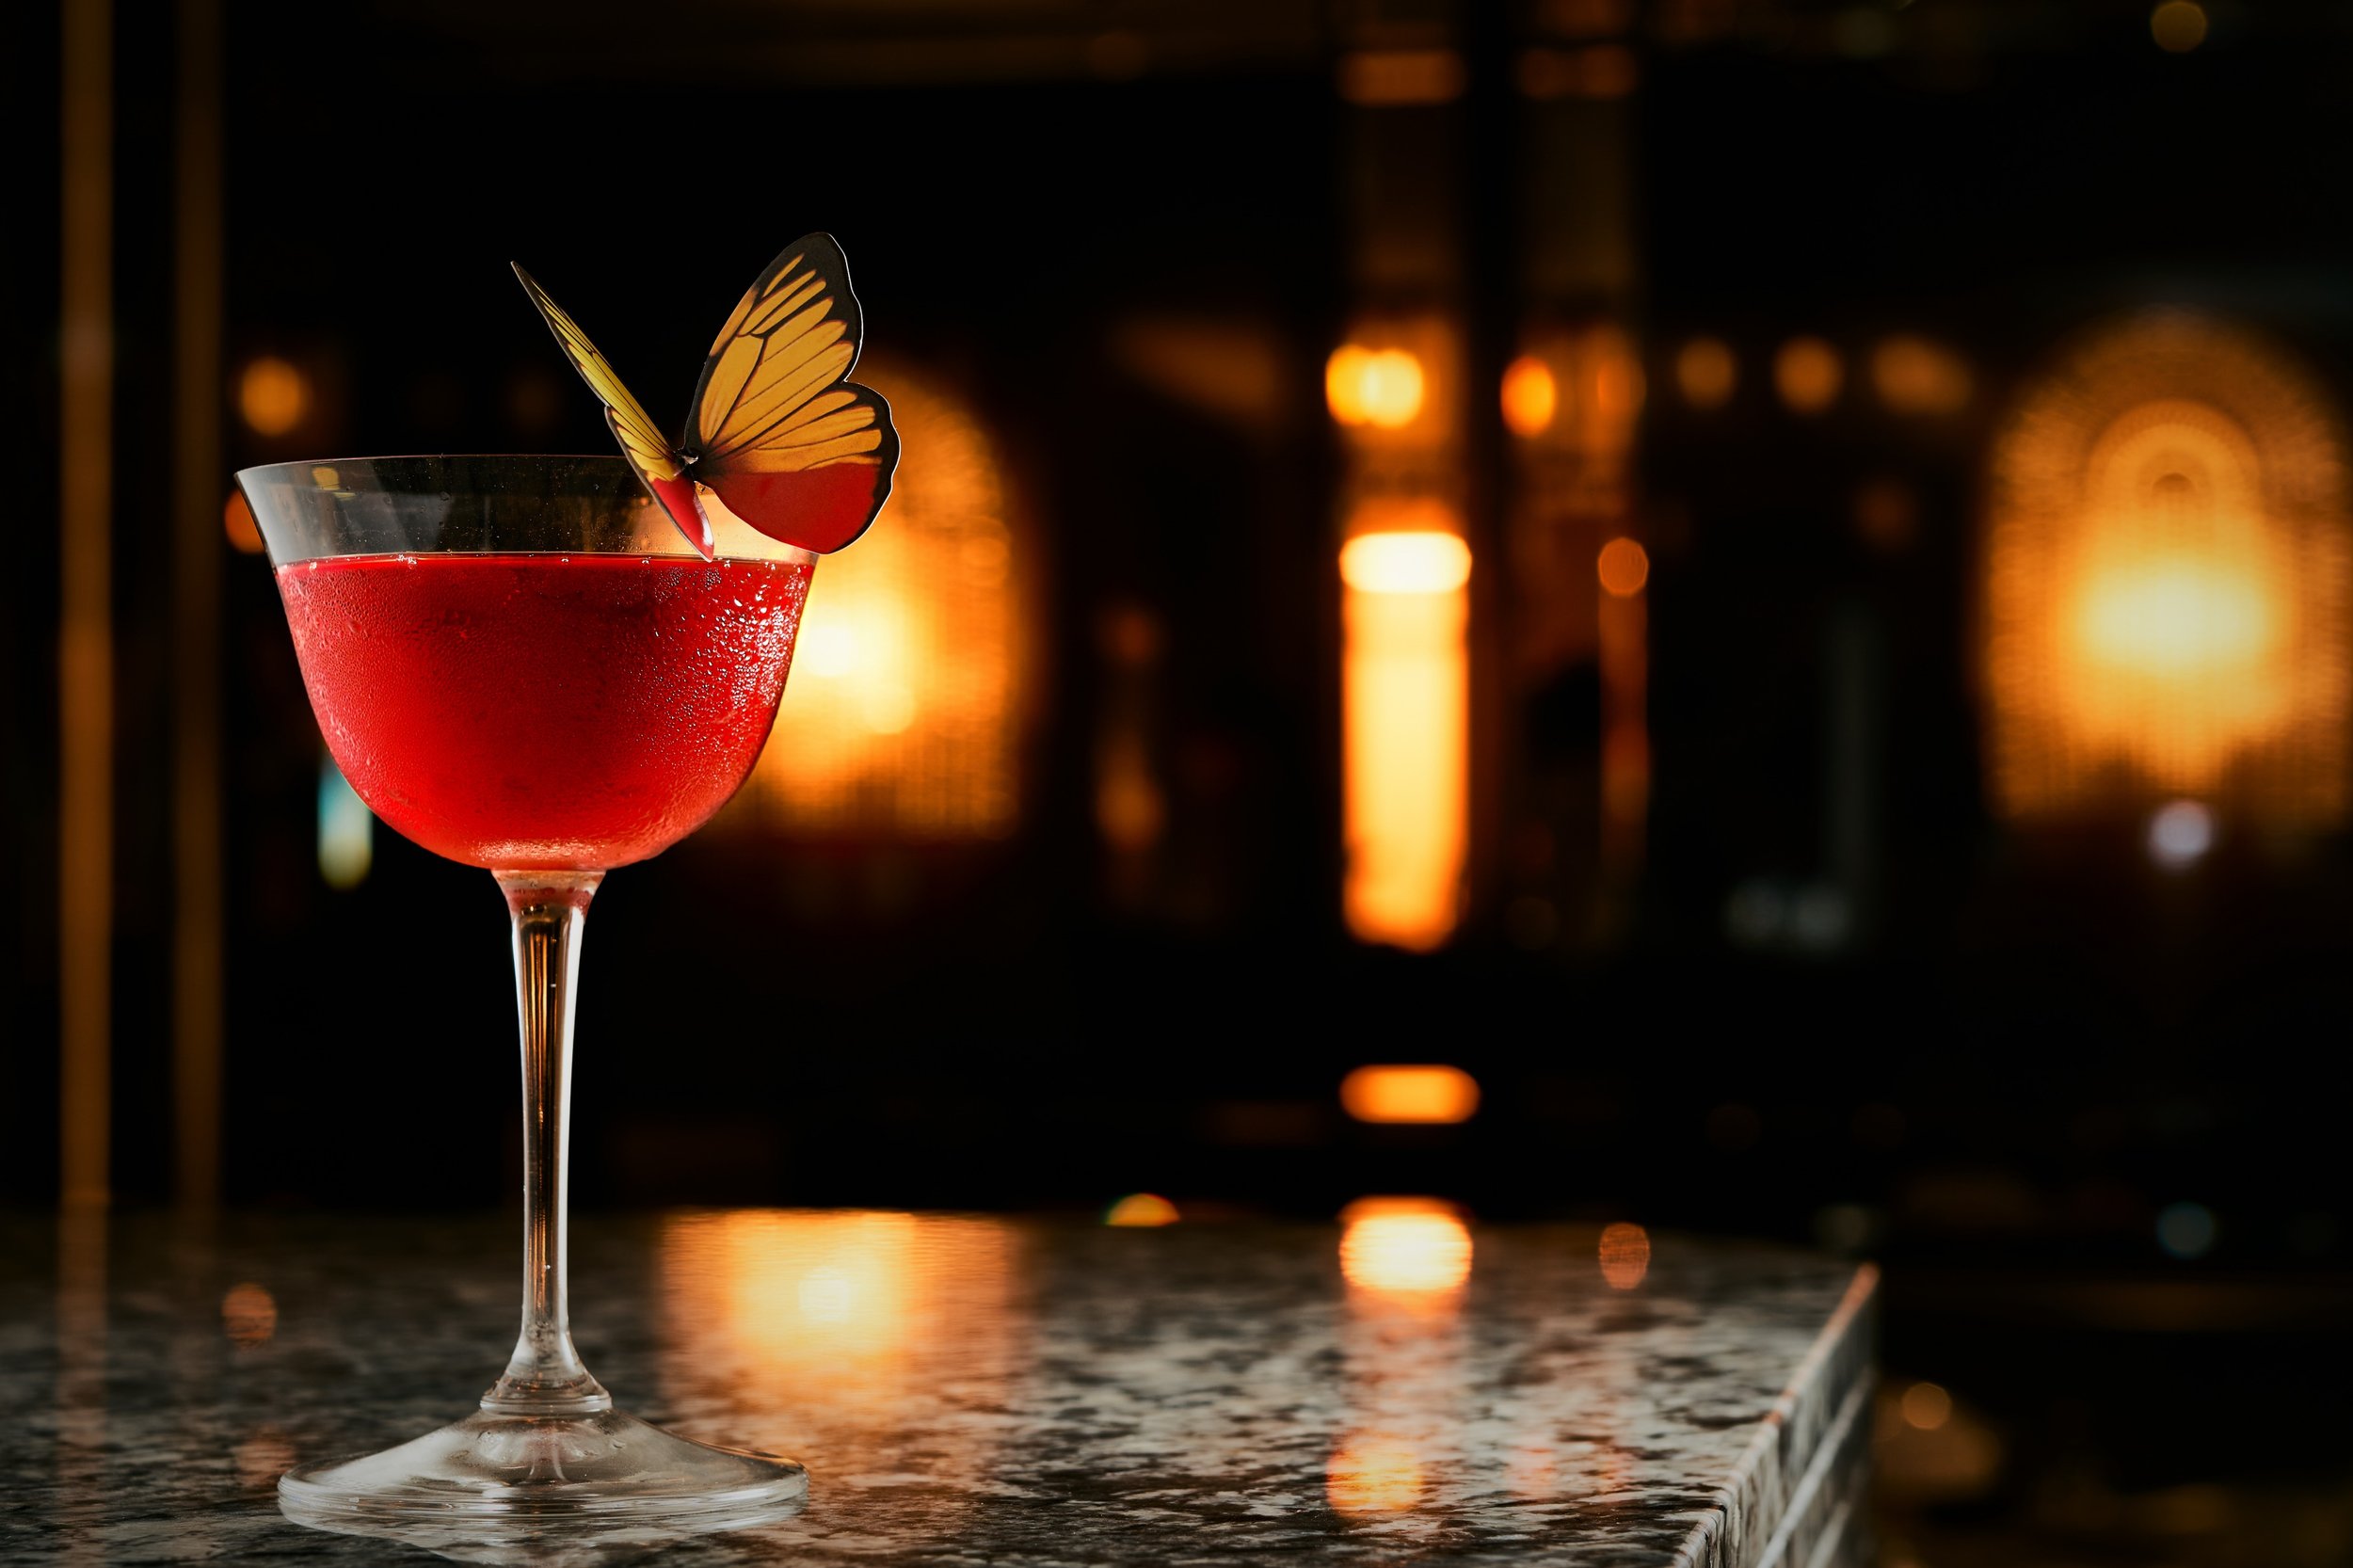 16_Cocktail_with_Butterfly_The_Dandy_Bar.jpg